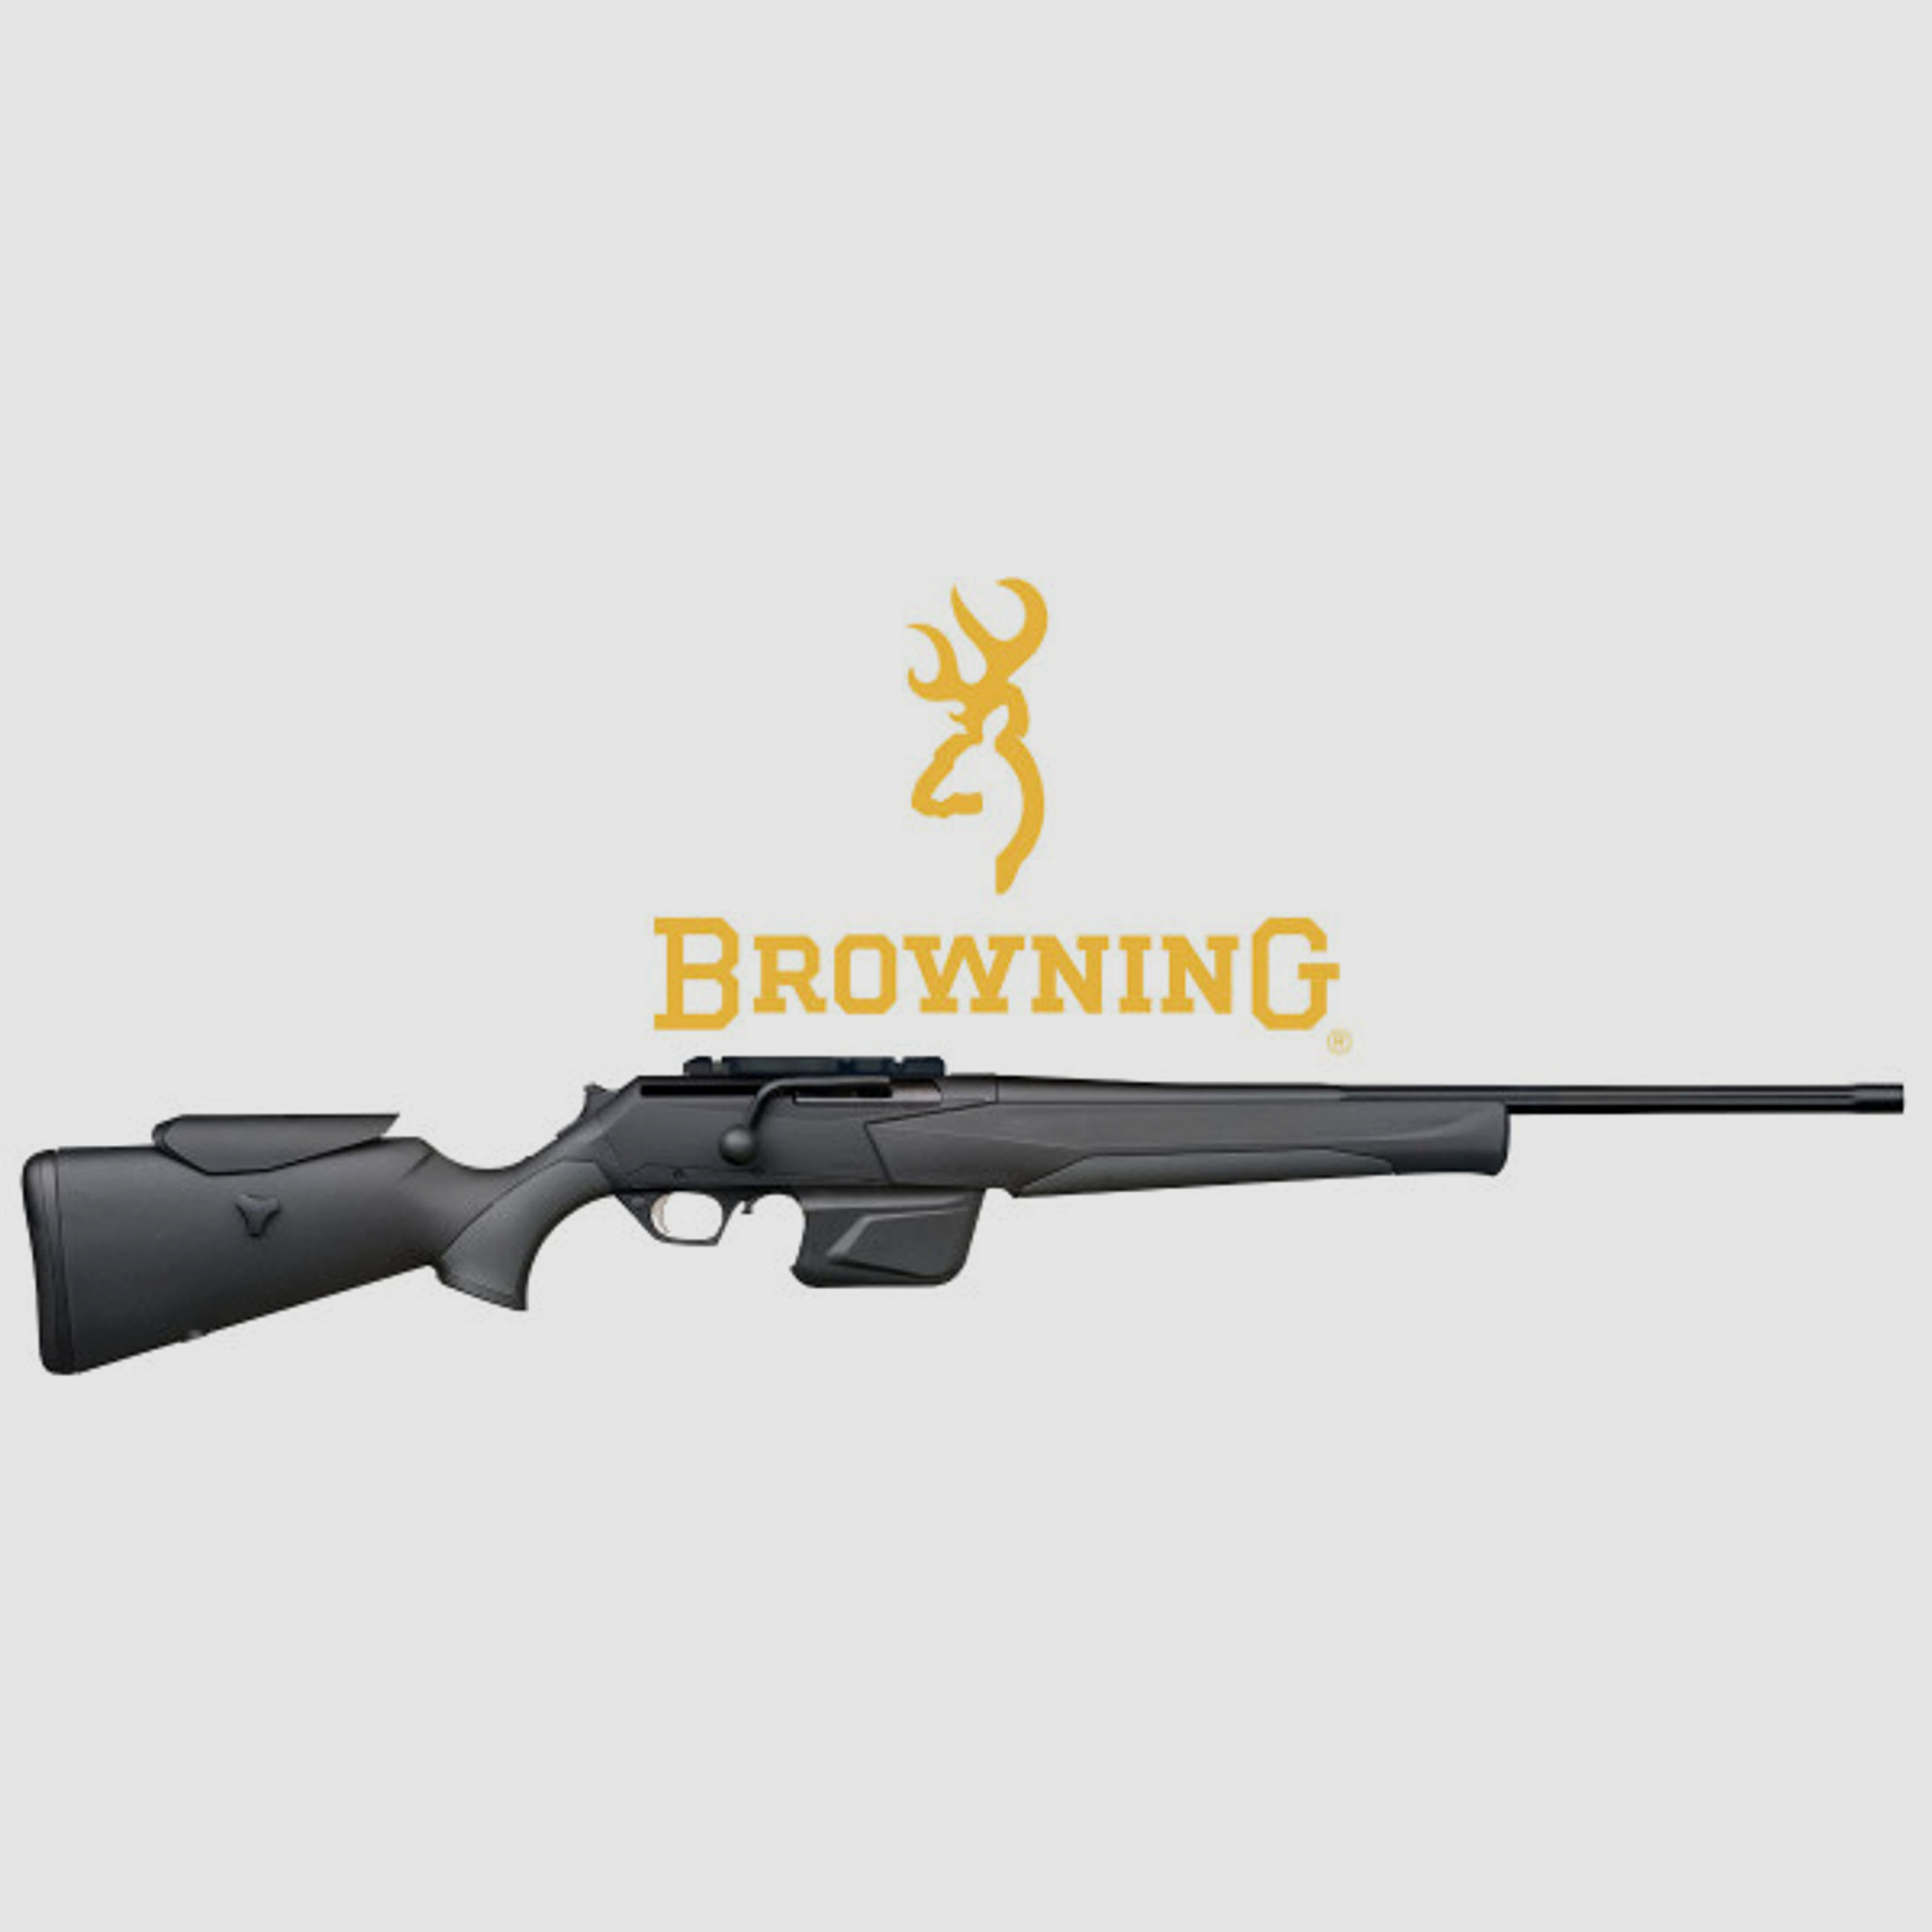 Browning MARAL COMPOSITE NORDIC HC ADJUSTABLE .30-06 Springfield Repetierbüchse